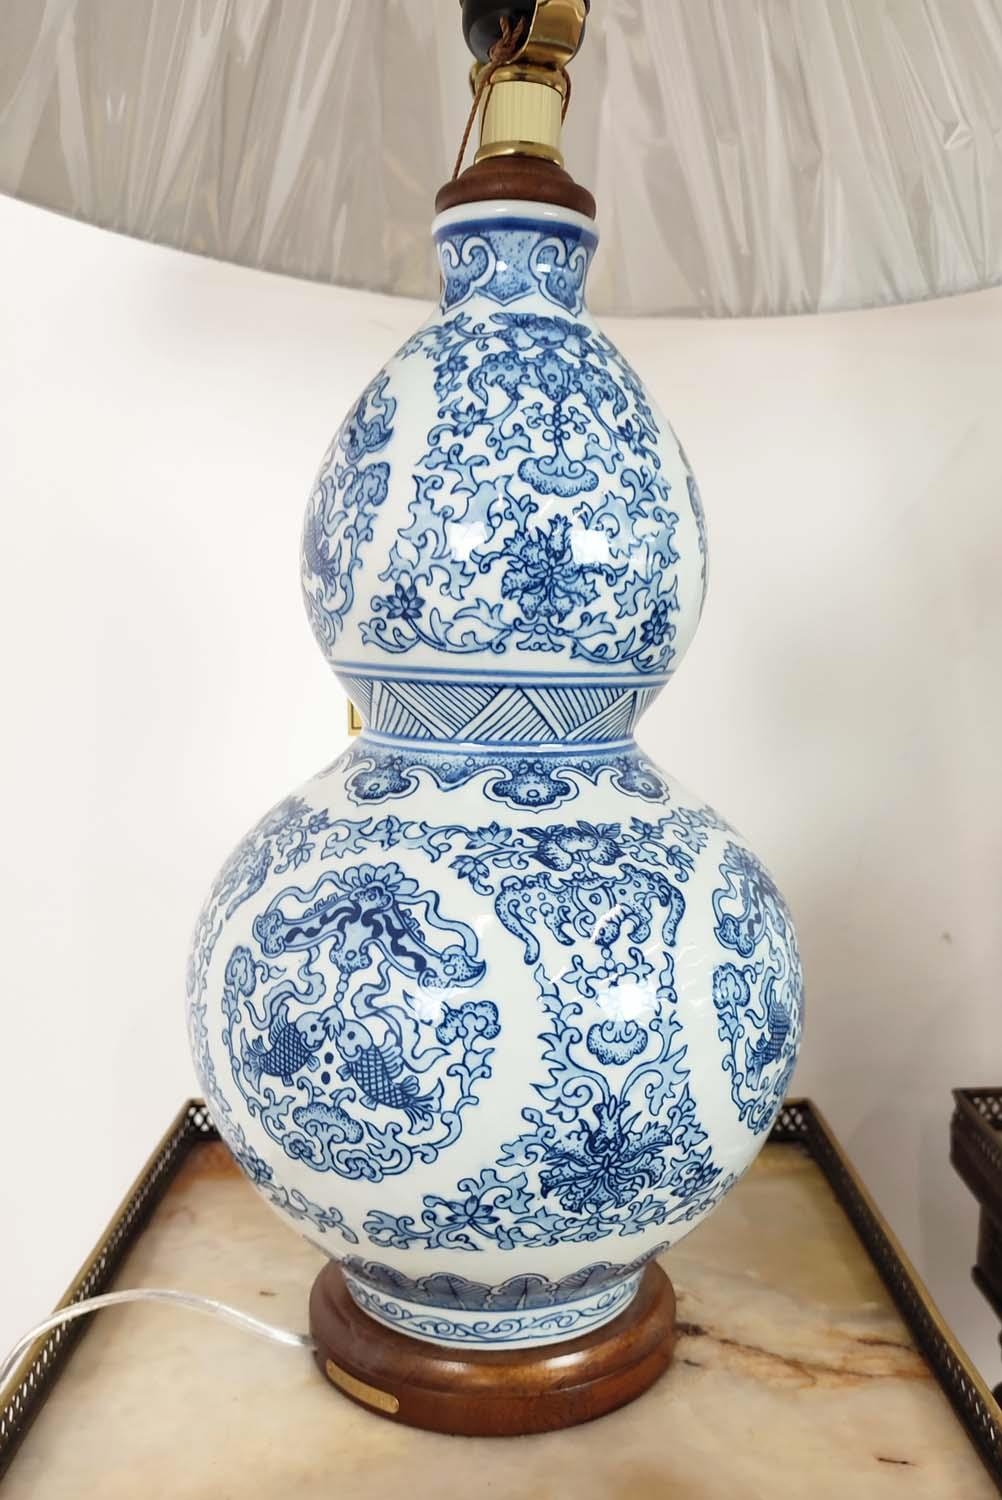 LAUREN RALPH LAUREN HOME TABLE LAMPS, a pair, double gourd design, blue and white glazed ceramic, - Image 3 of 6